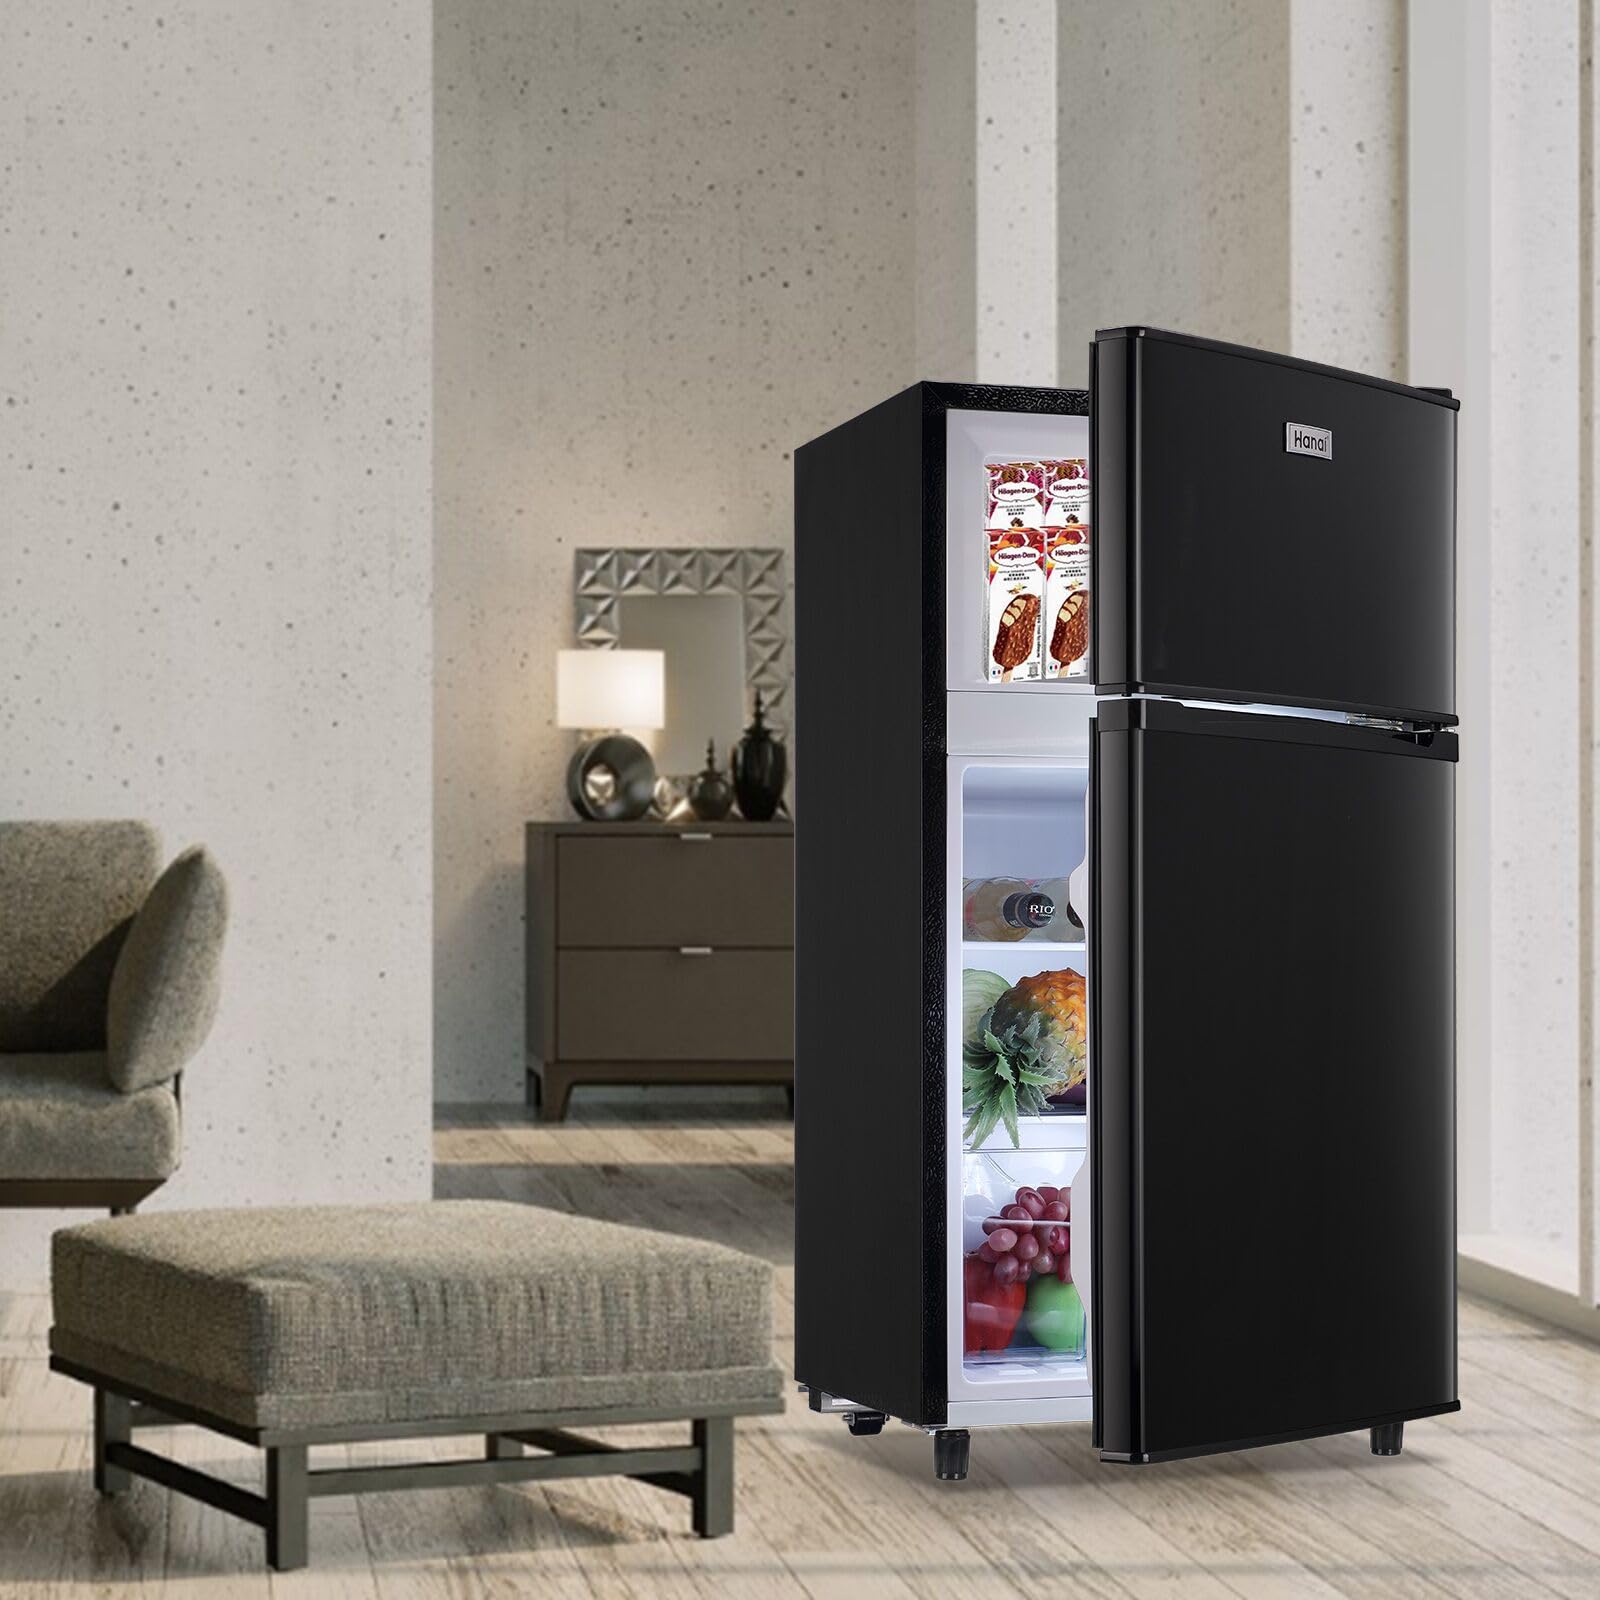 WANAI Compact Refrigerator 3.5 Cu.ft Dual Door Mini Fridge with Freezer, Small Refrigerator with 7 TEMP Modes, Energy Saving, Low Noise for Bedroom, Dorm, Office, Apartment, Black